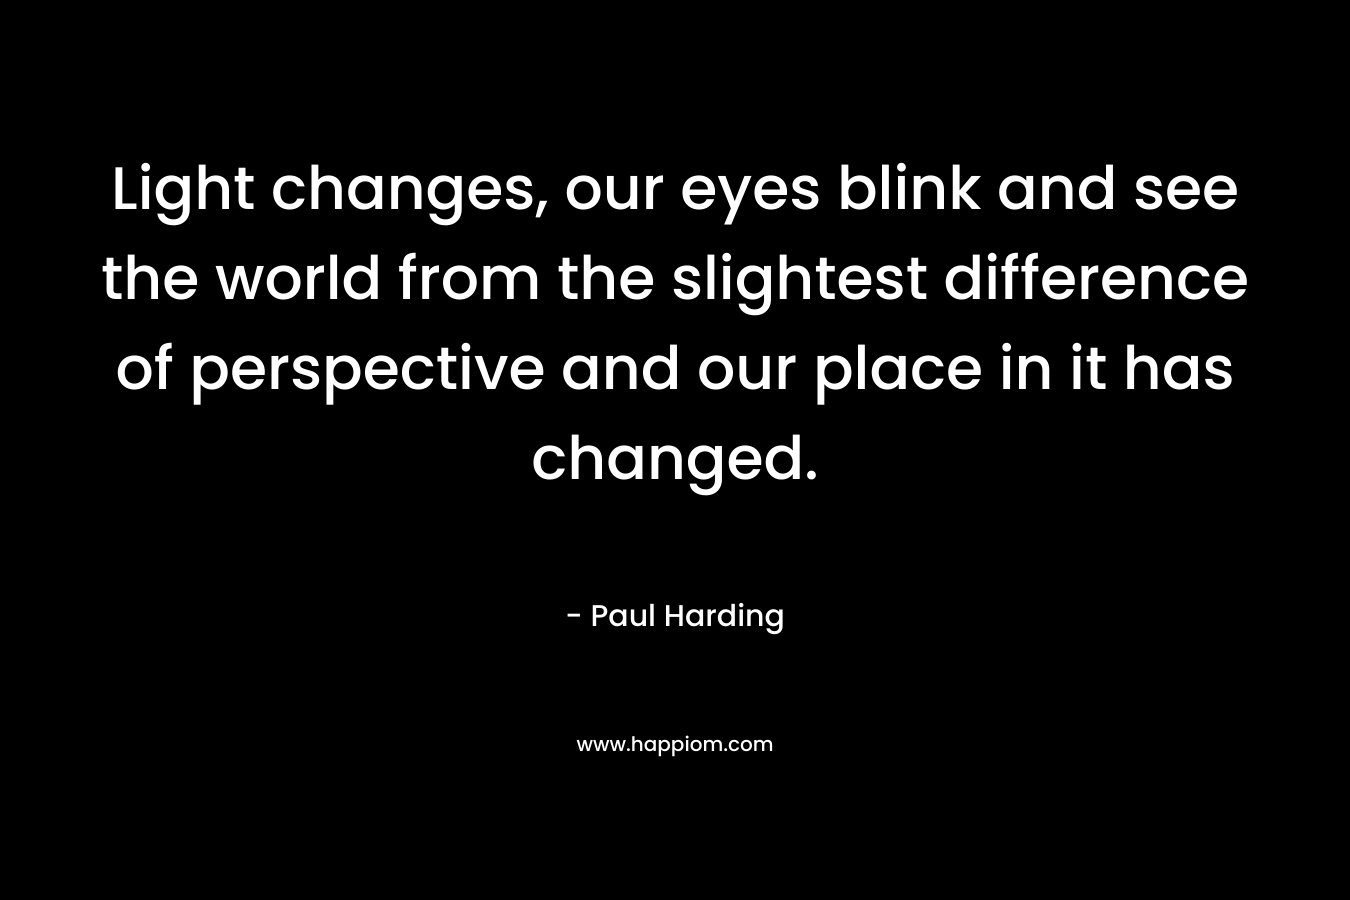 Light changes, our eyes blink and see the world from the slightest difference of perspective and our place in it has changed. – Paul Harding